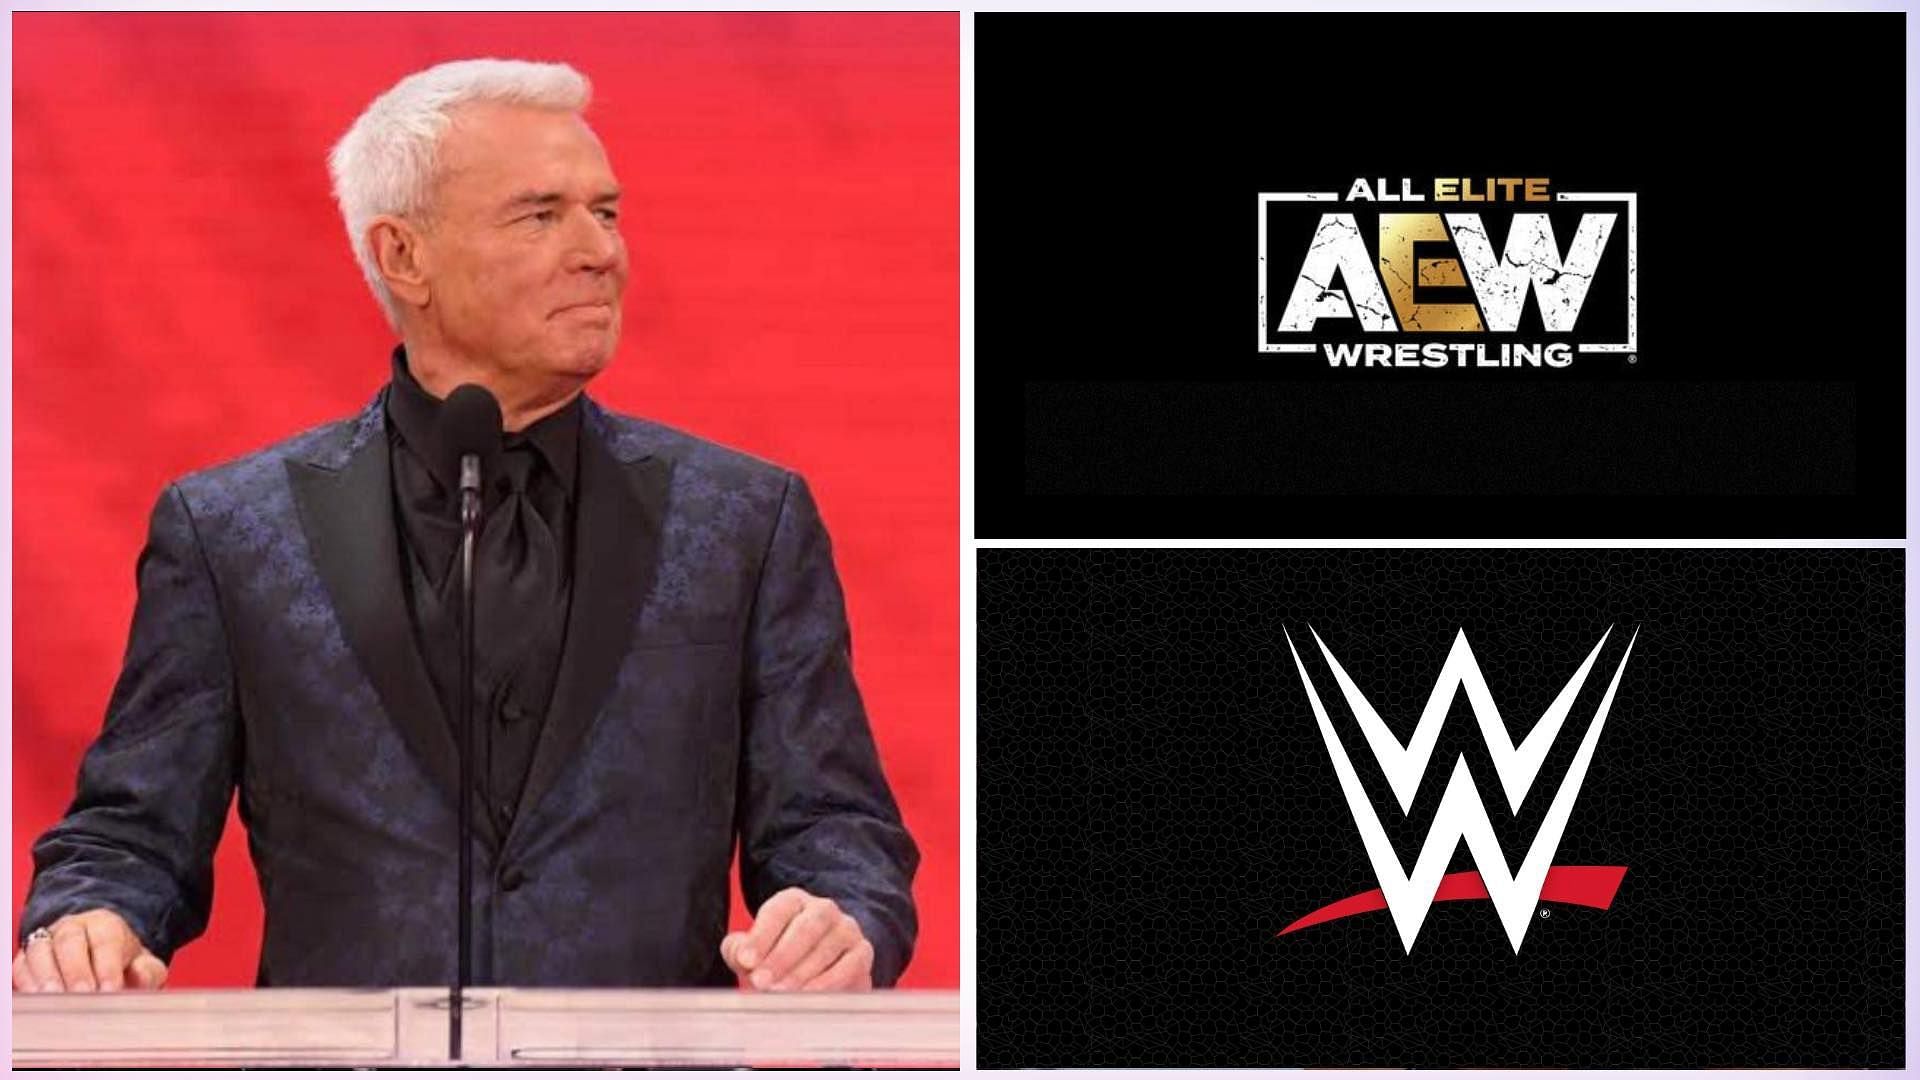 Eric Bischoff is a former WWE General Manager